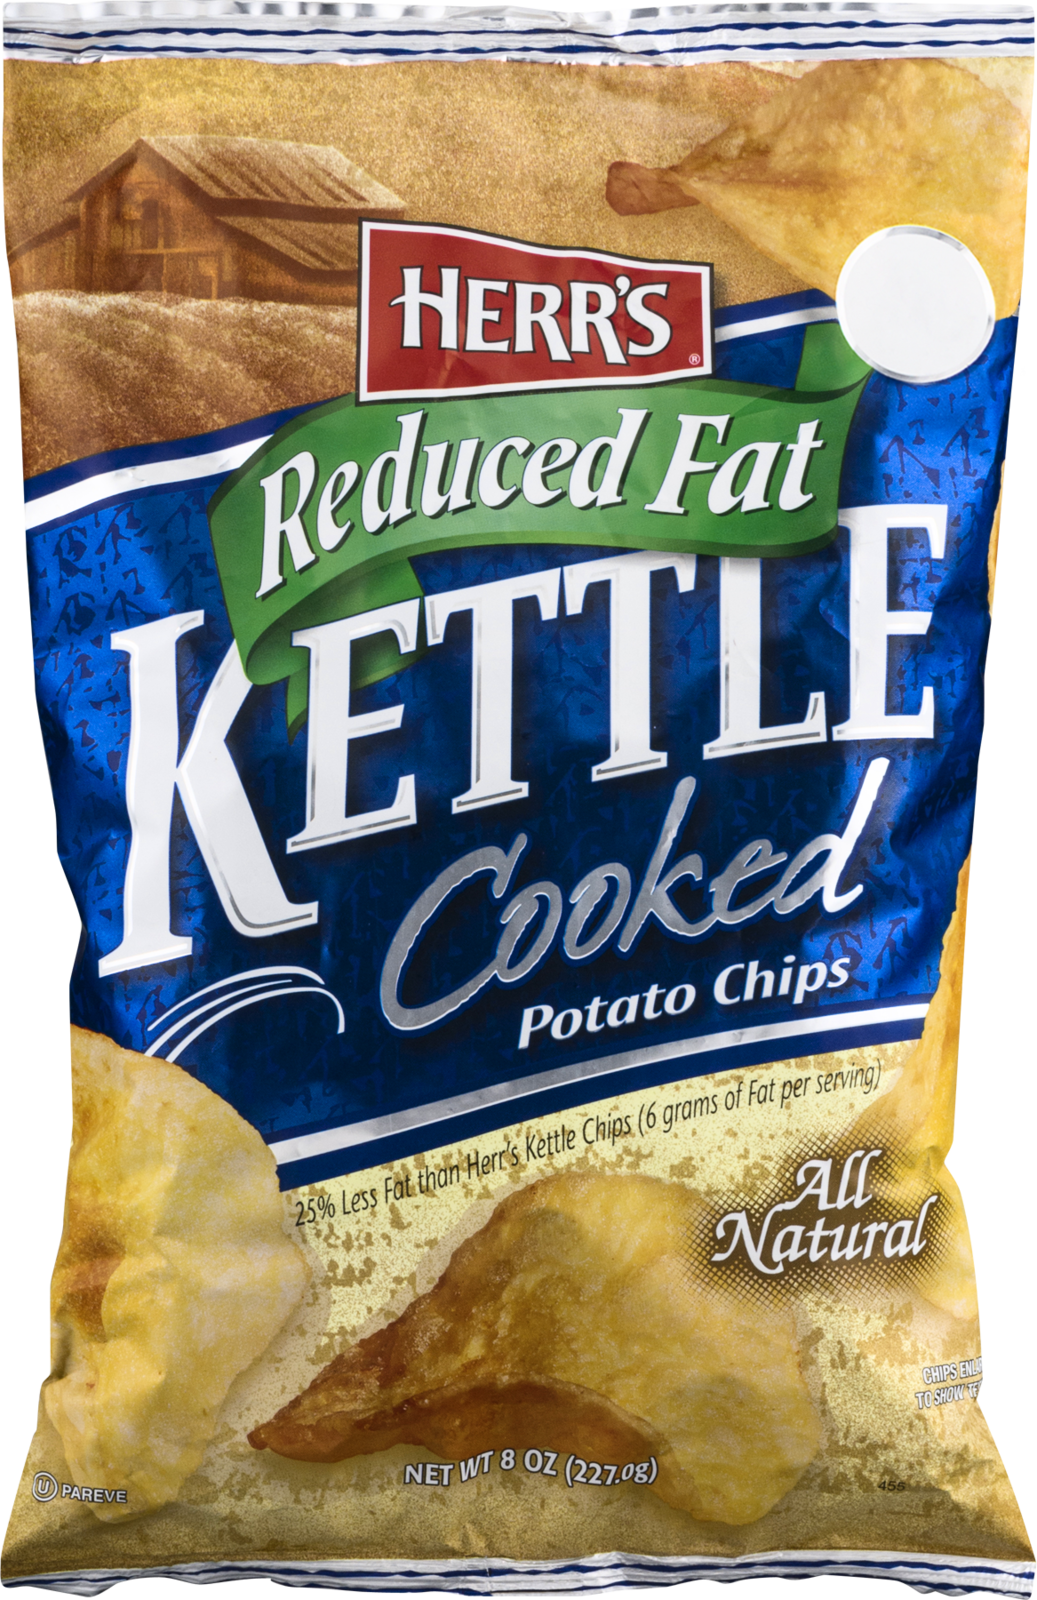 Primary image for Herr's Kettle Cooked Potato Chips Reduced Fat - 16 Oz. (4 Bags)